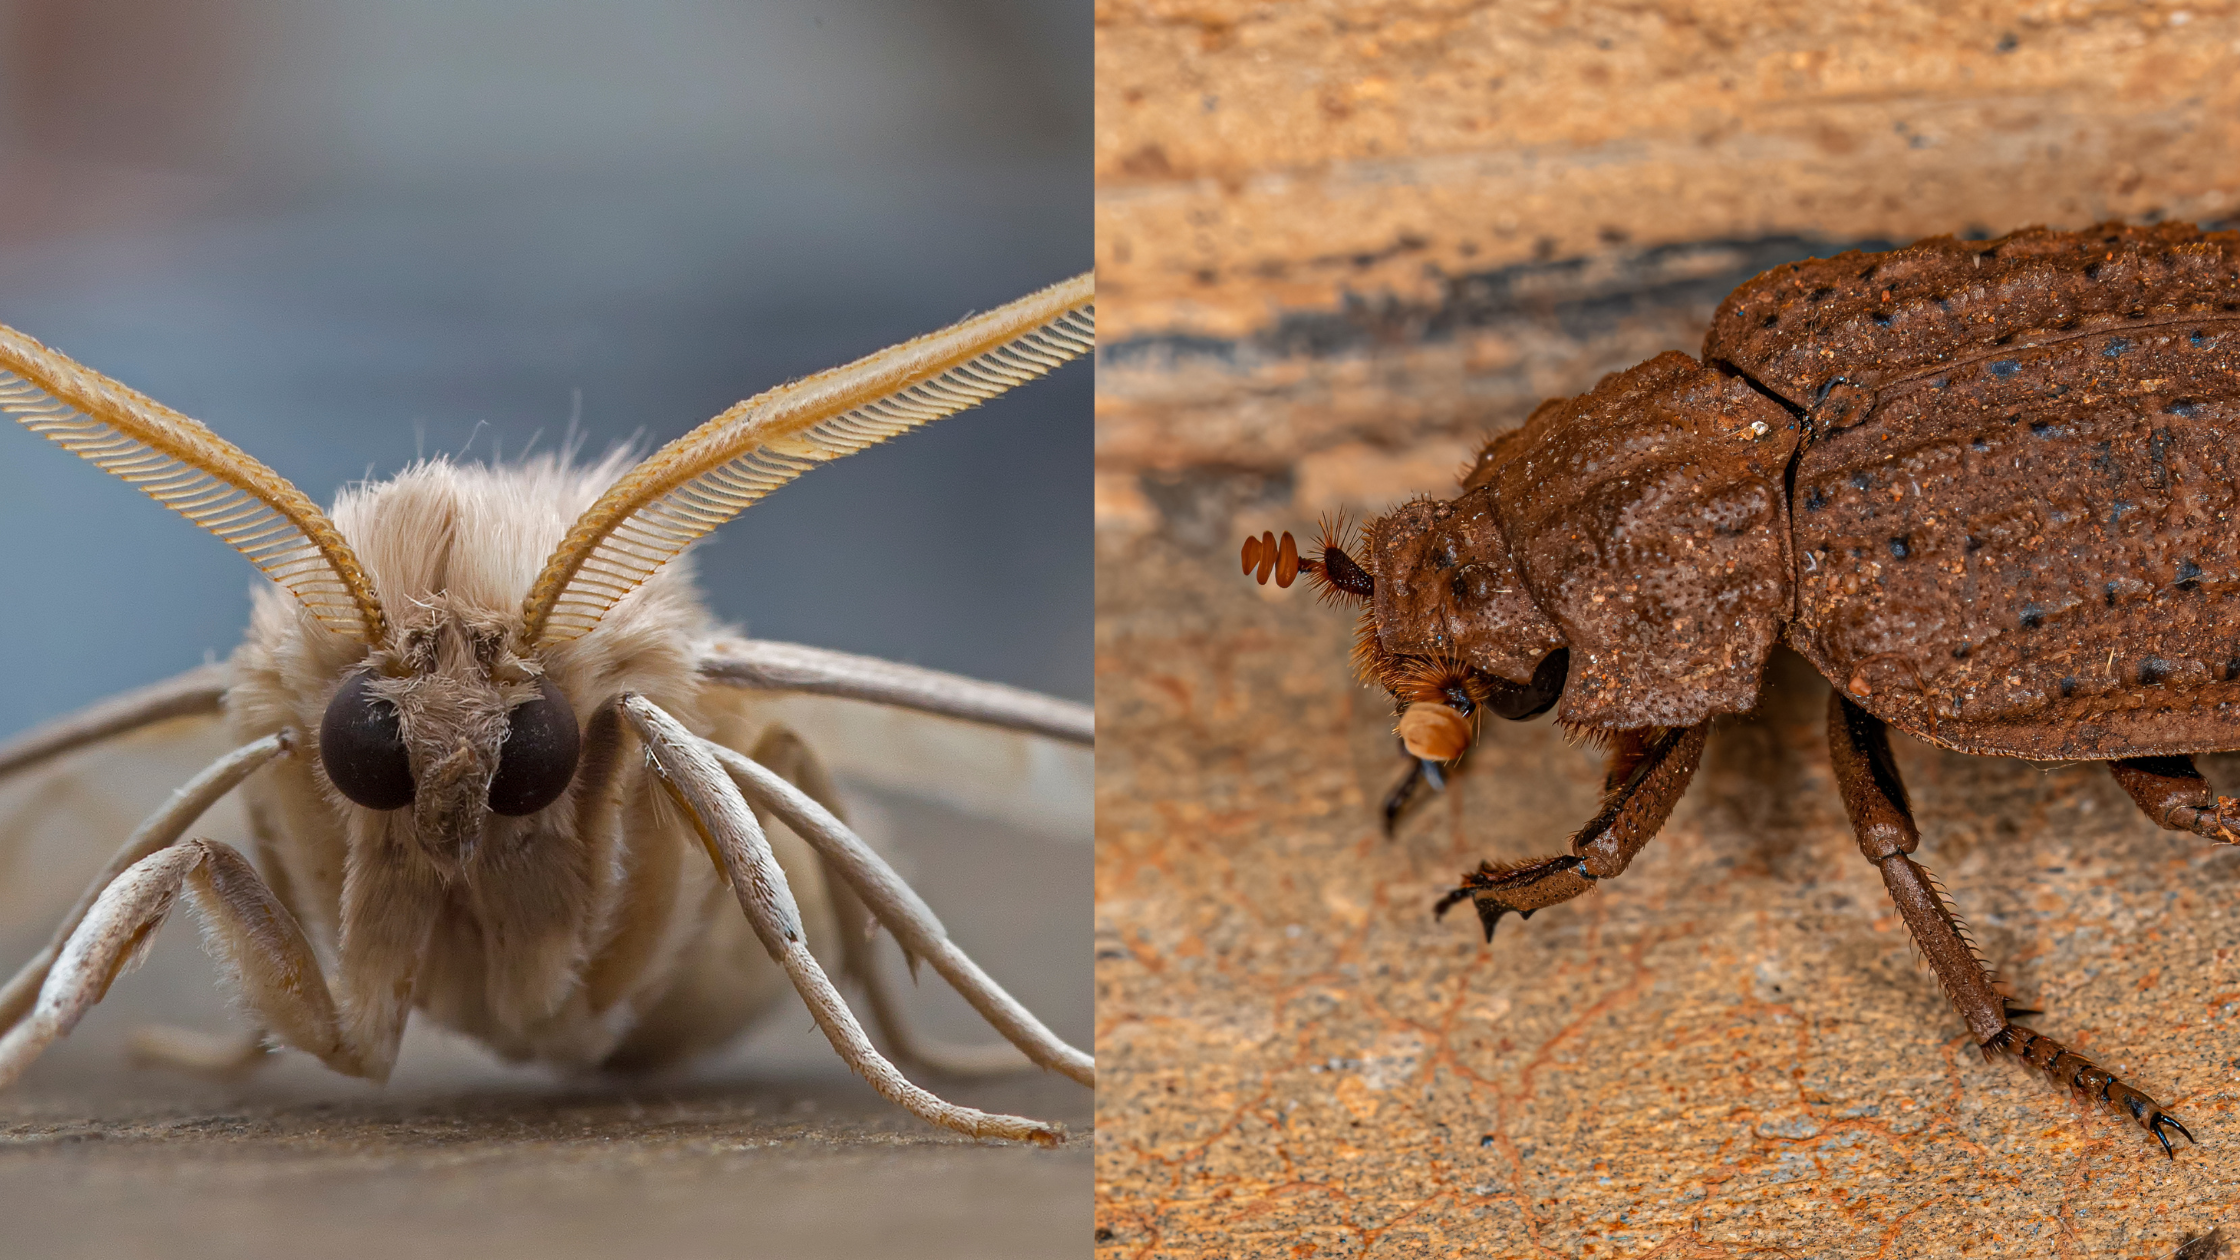 The clothes moth and hide beetle are two of the many fabric pests in Central Texas